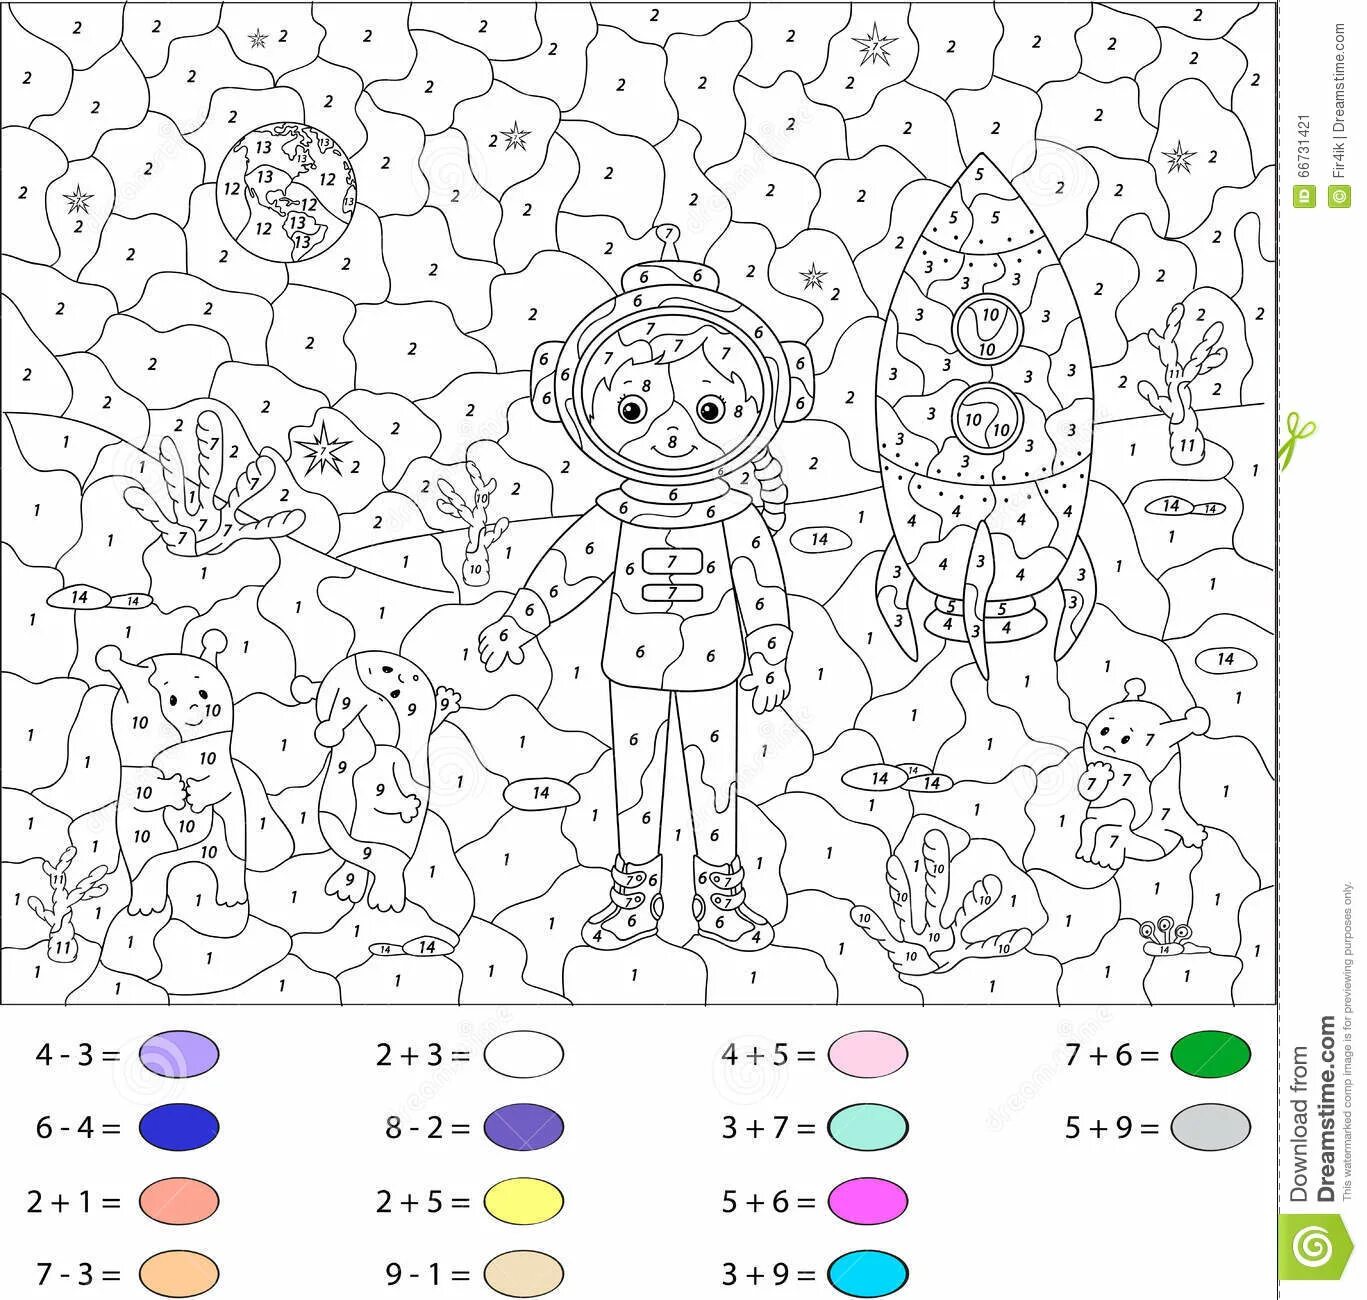 Pleasant planet coloring by numbers